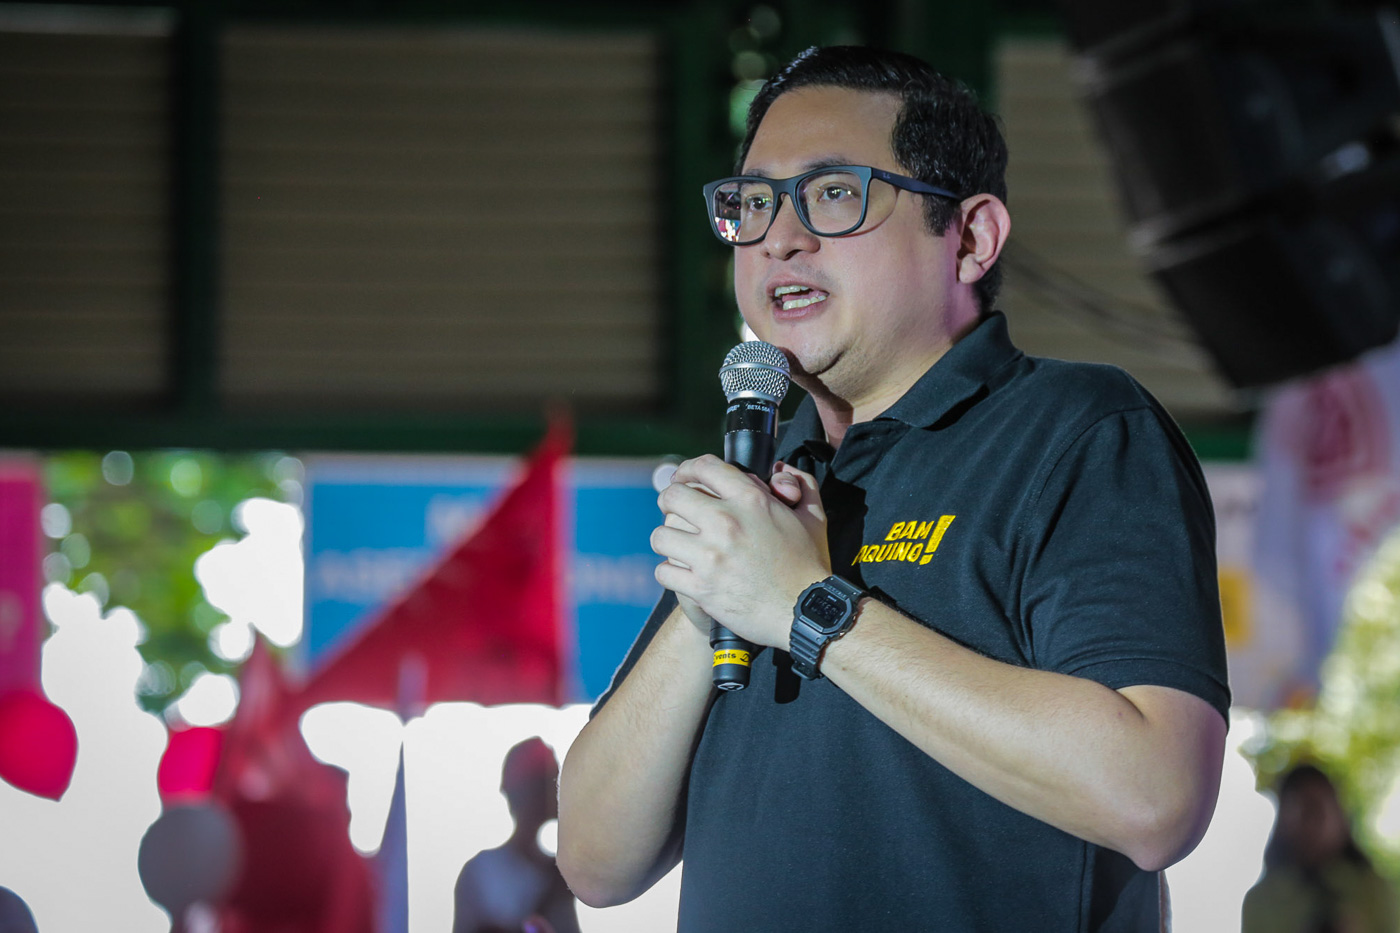 OPPOSITION SENATOR. Reelectionist Senator Bam Aquino addresses supporters at the launch of the Oposisyon Koalisyon senatorial candidates on October 24, 2018. Photo by Jire Carreon/Rappler 